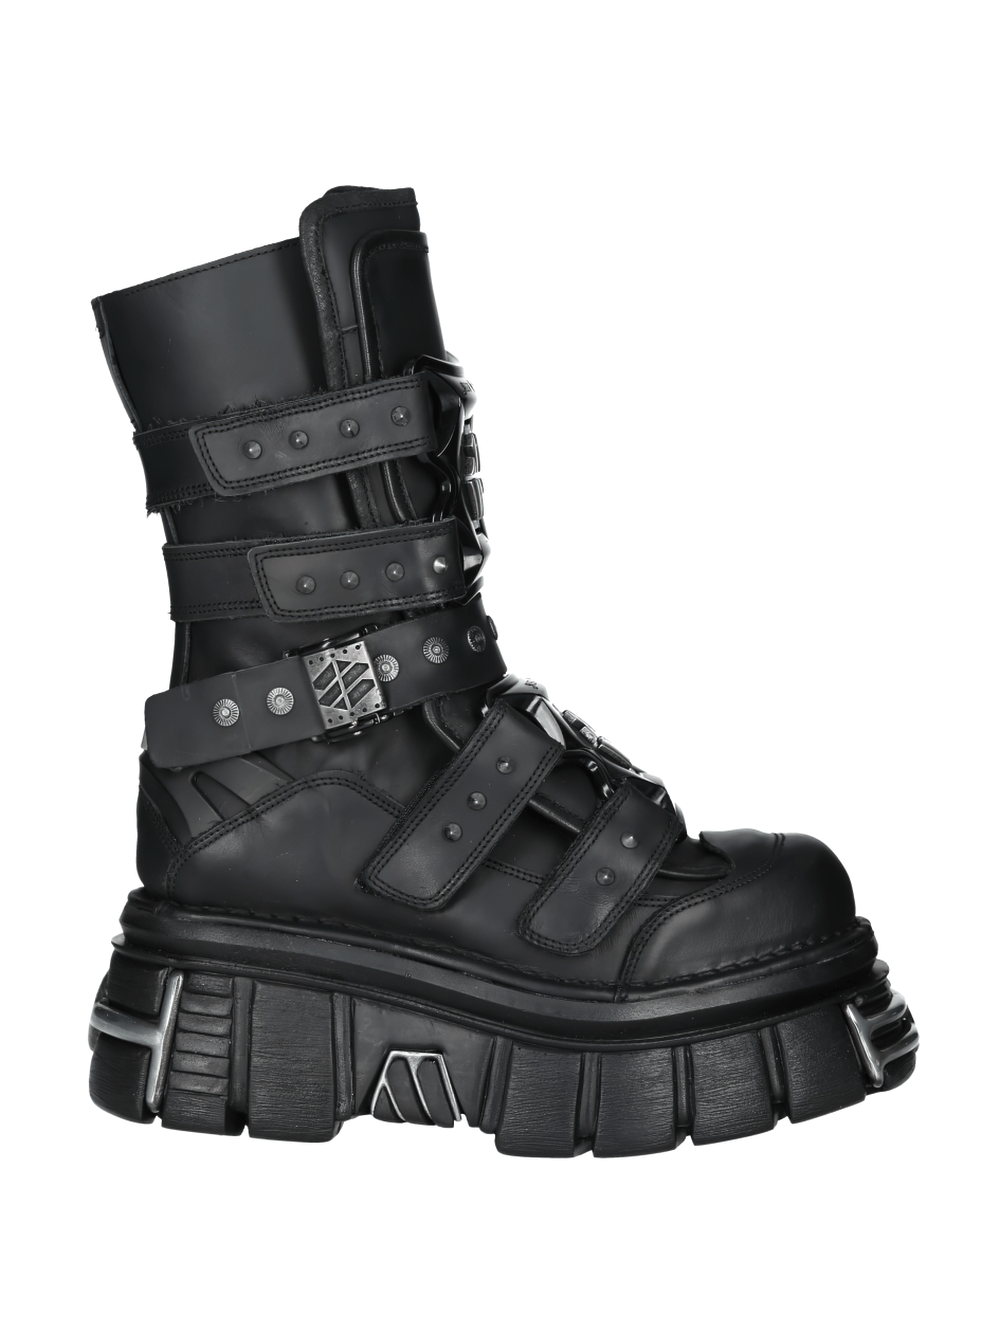 NEW ROCK Gothic Black Boots with Steel Toe Design